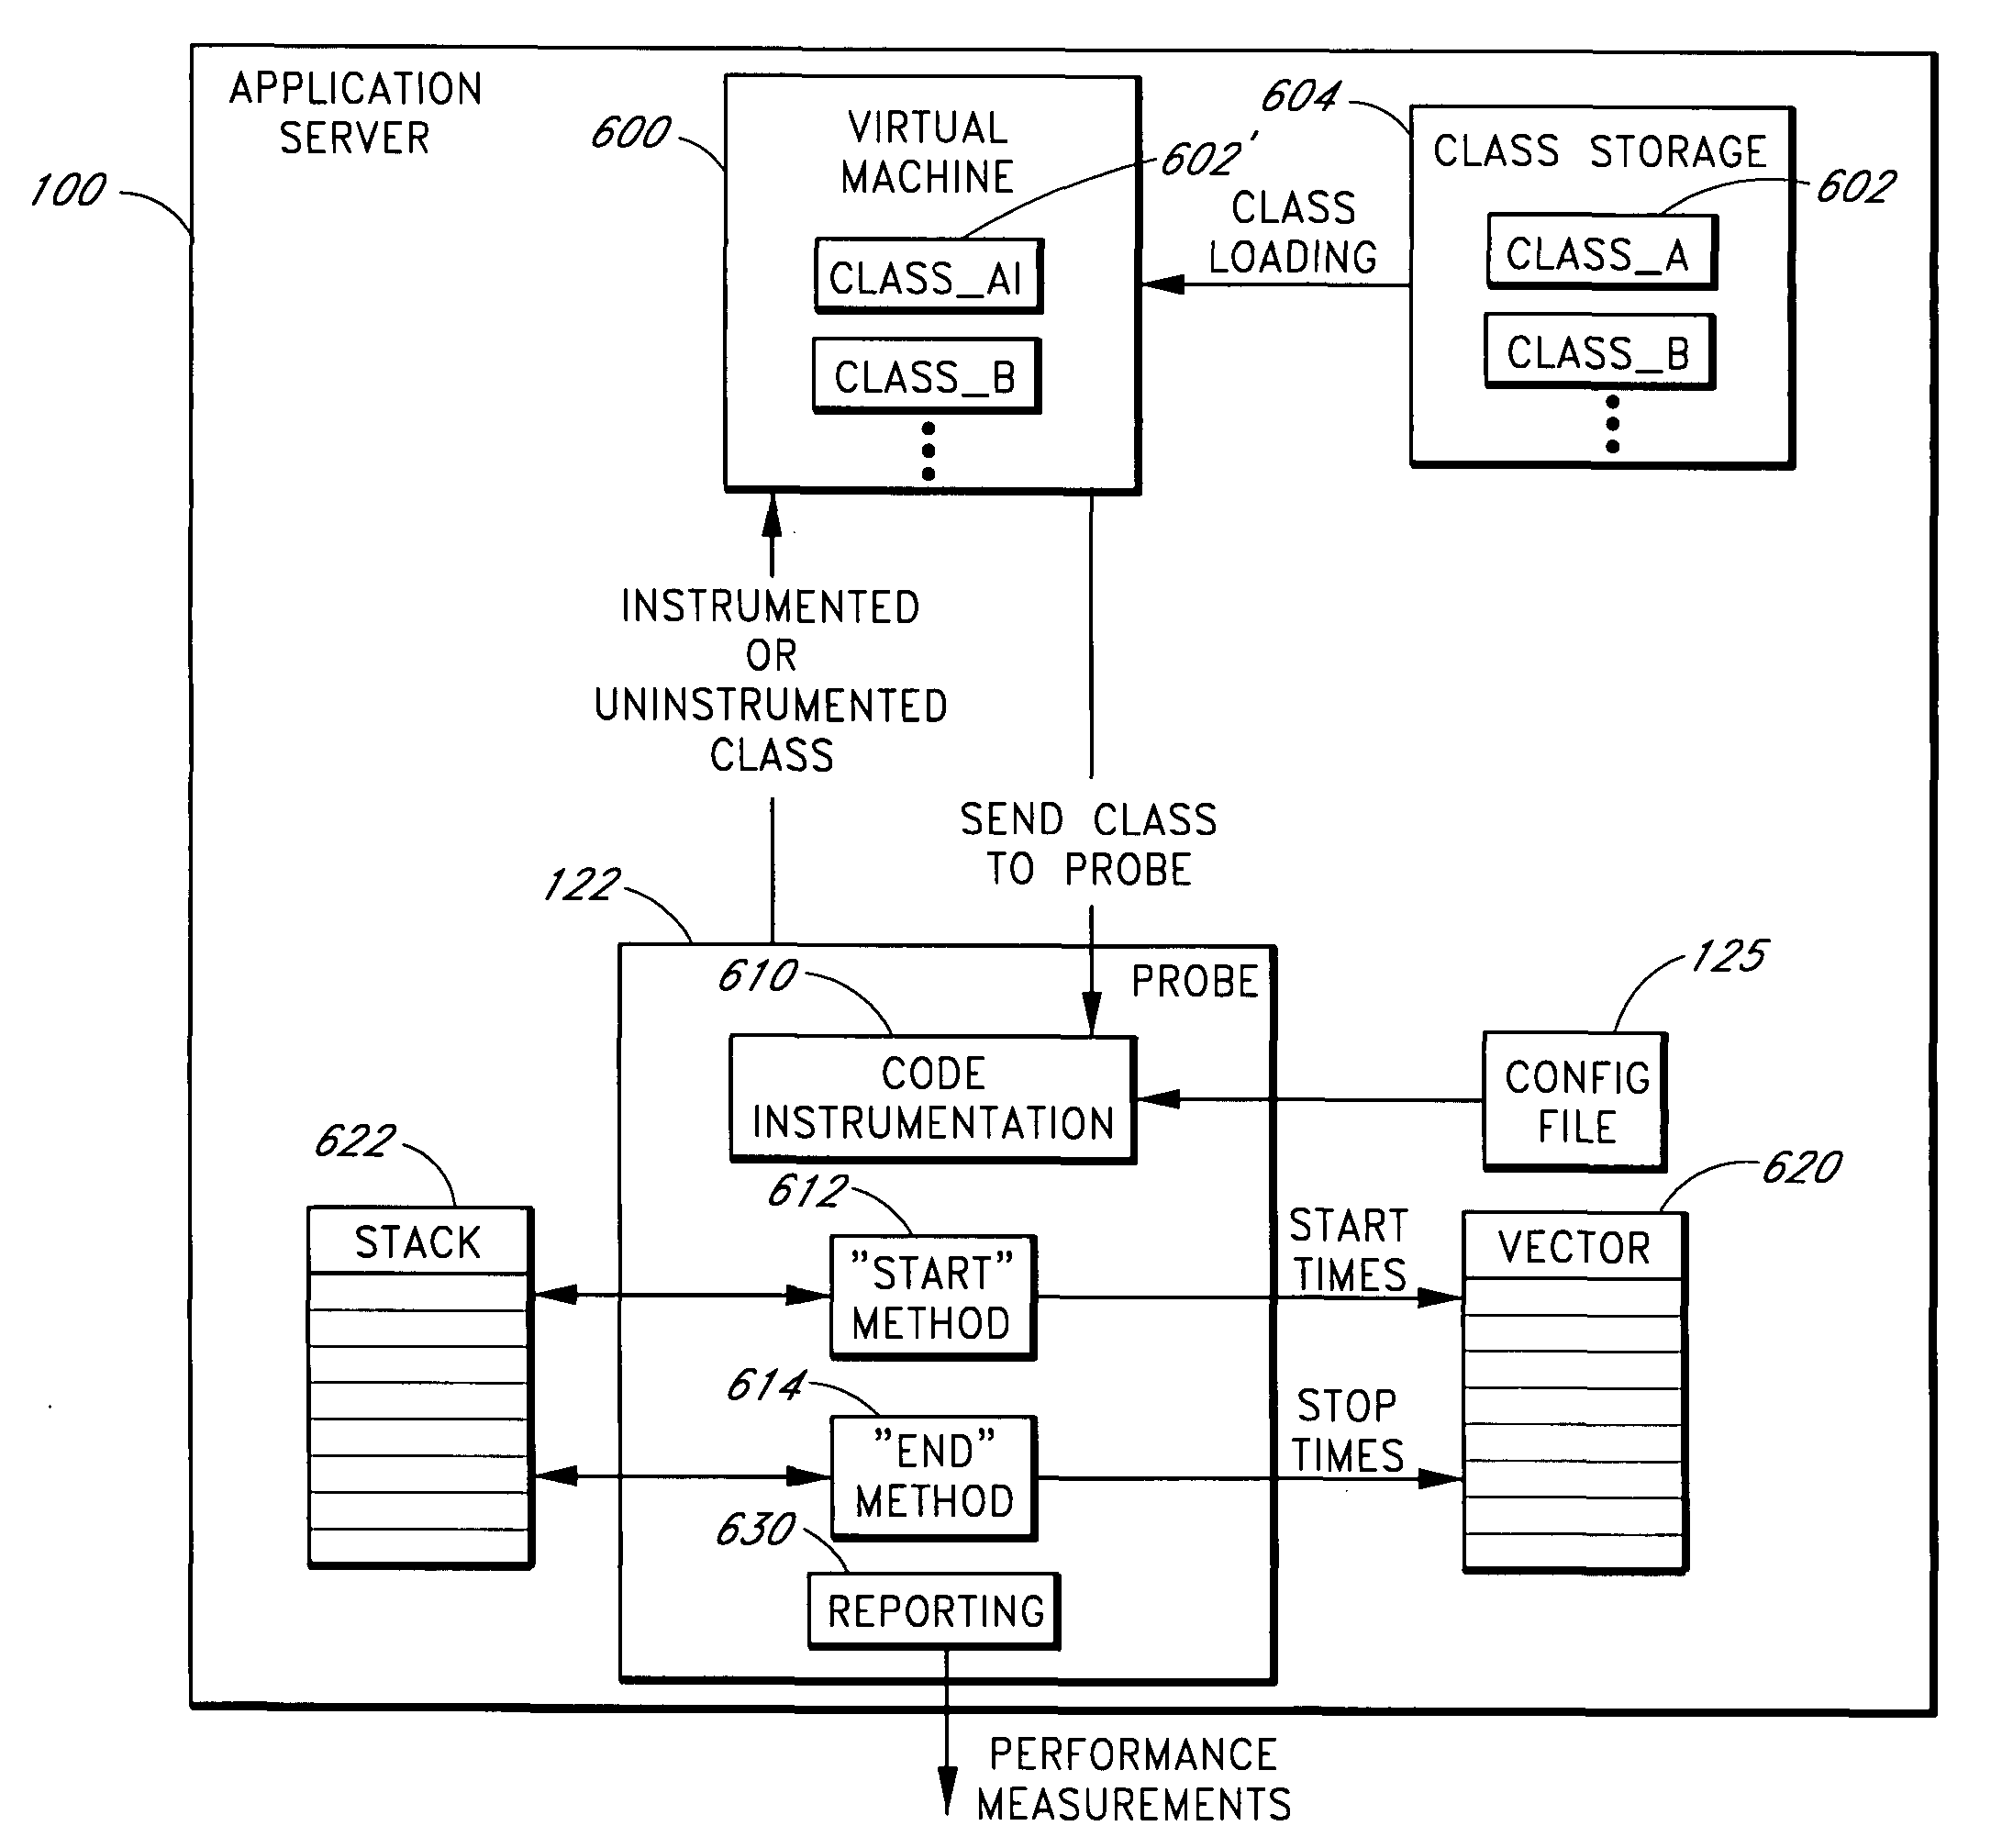 System and methods for monitoring application server performance